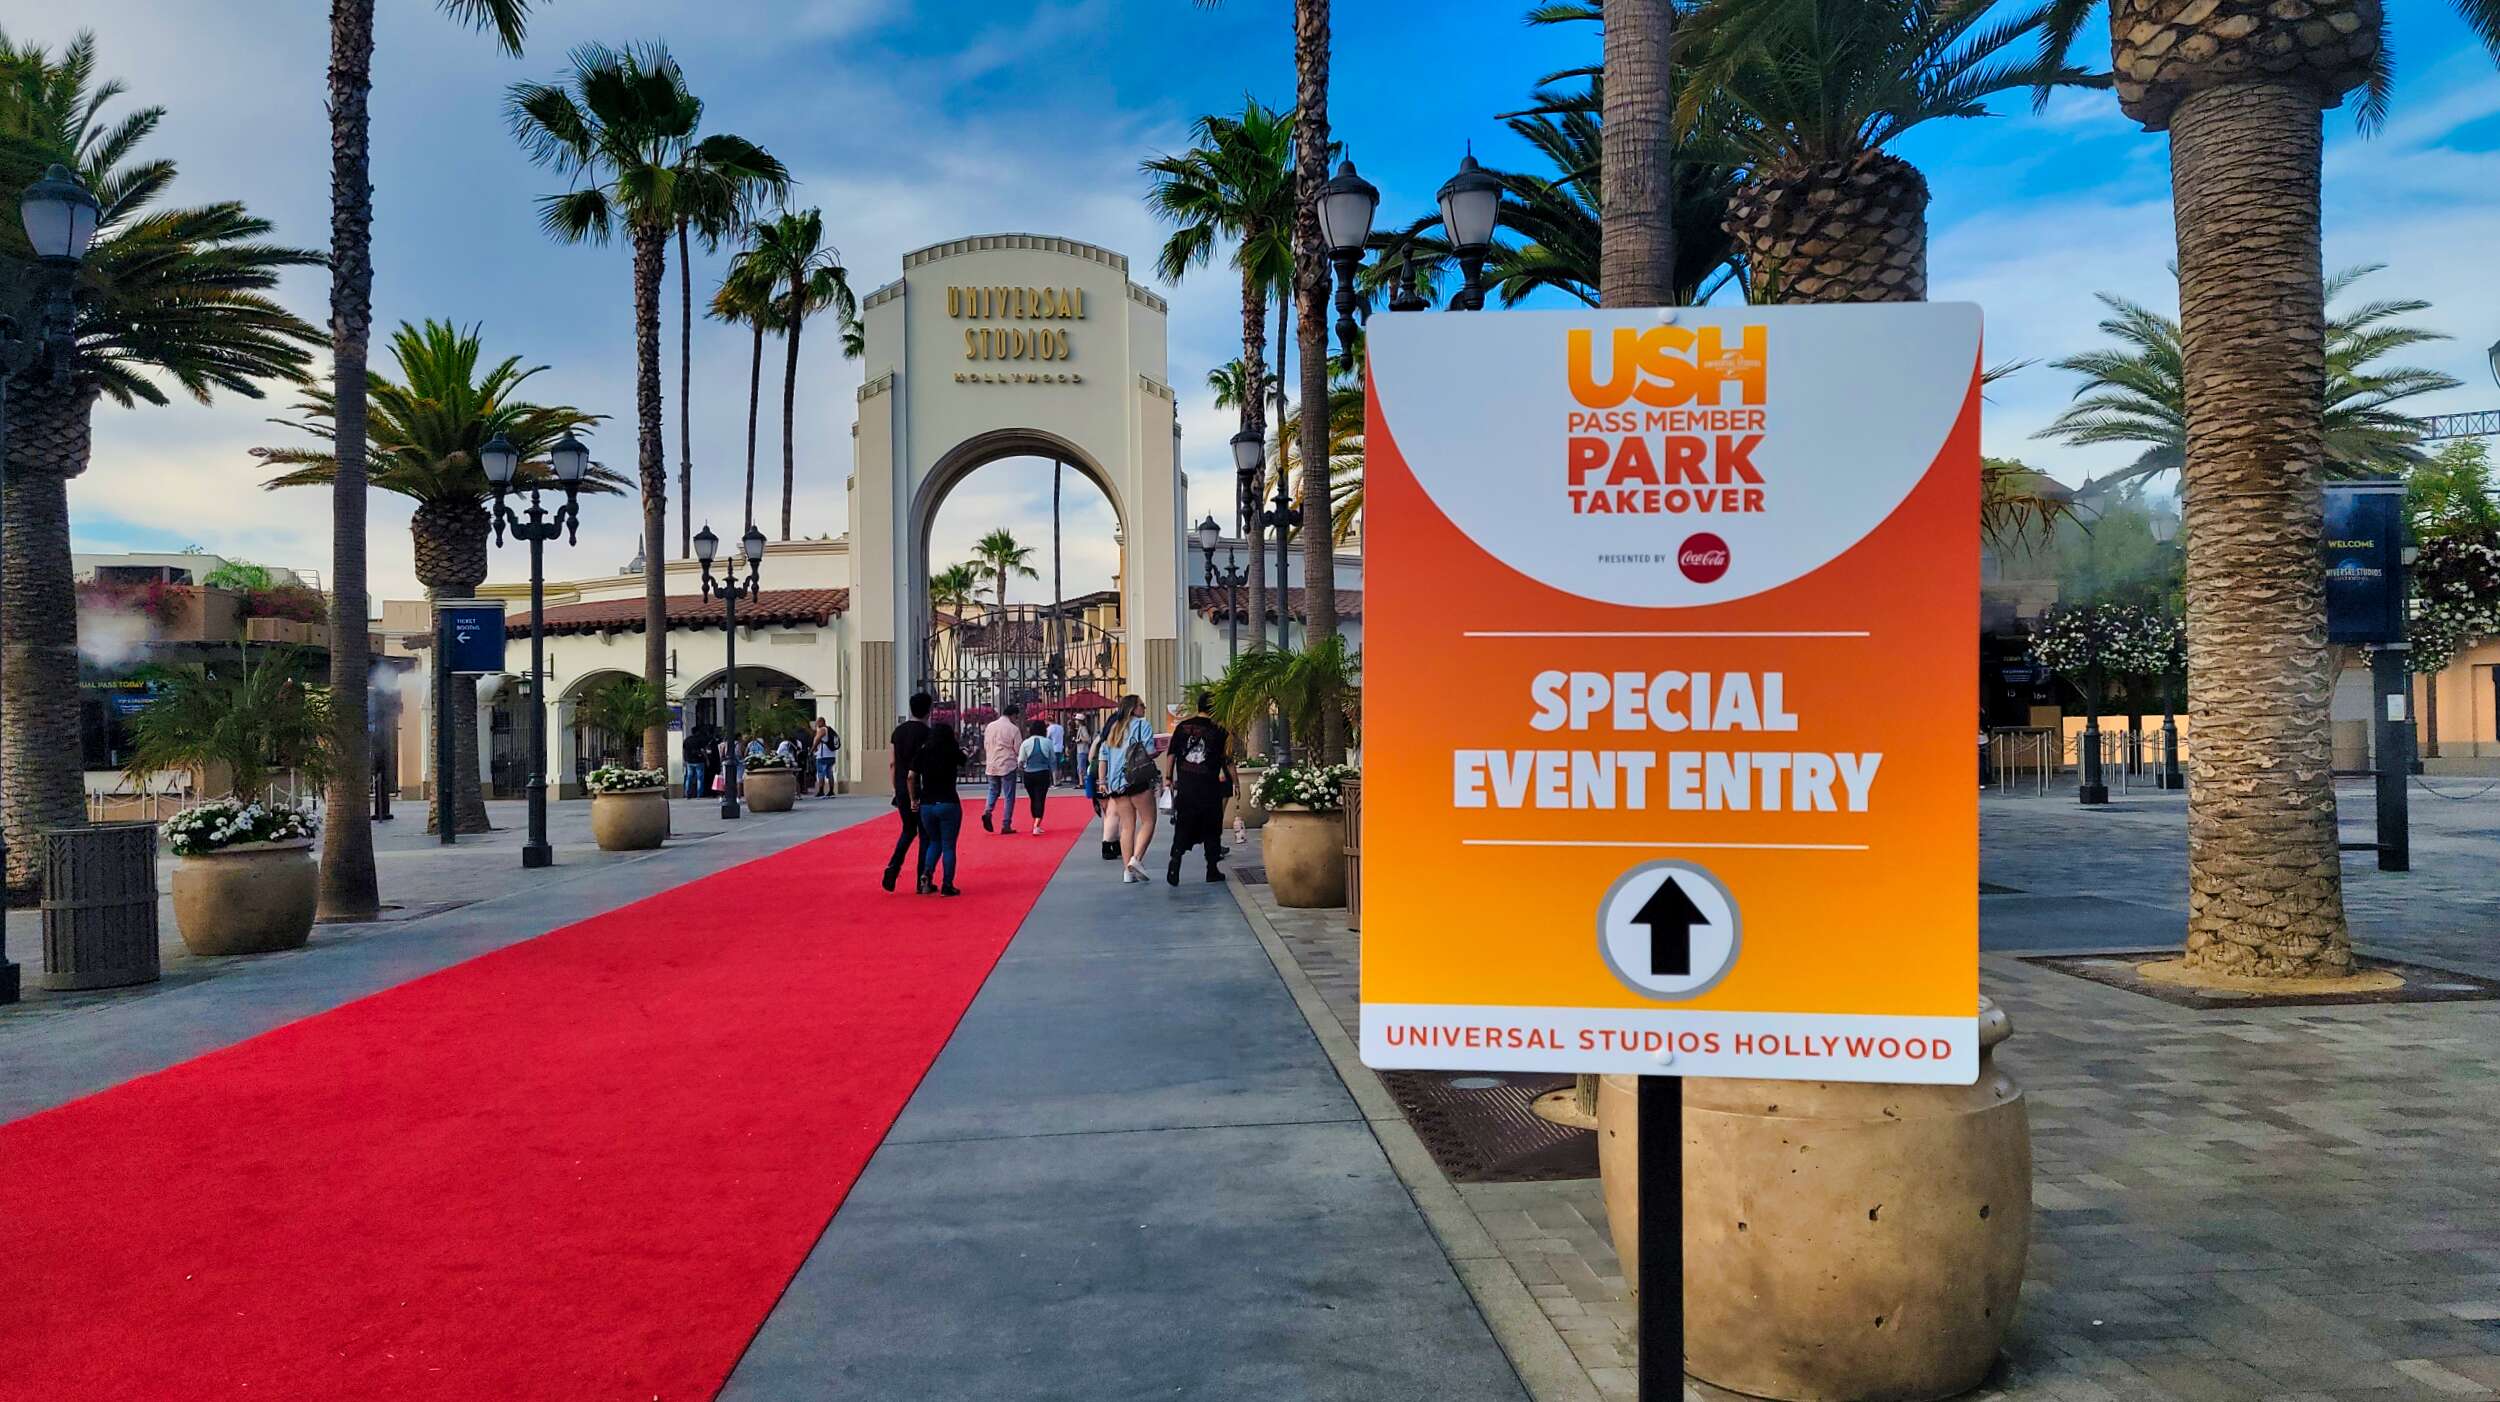 USH Pass Member Park Takeover Night entrance with arch stock